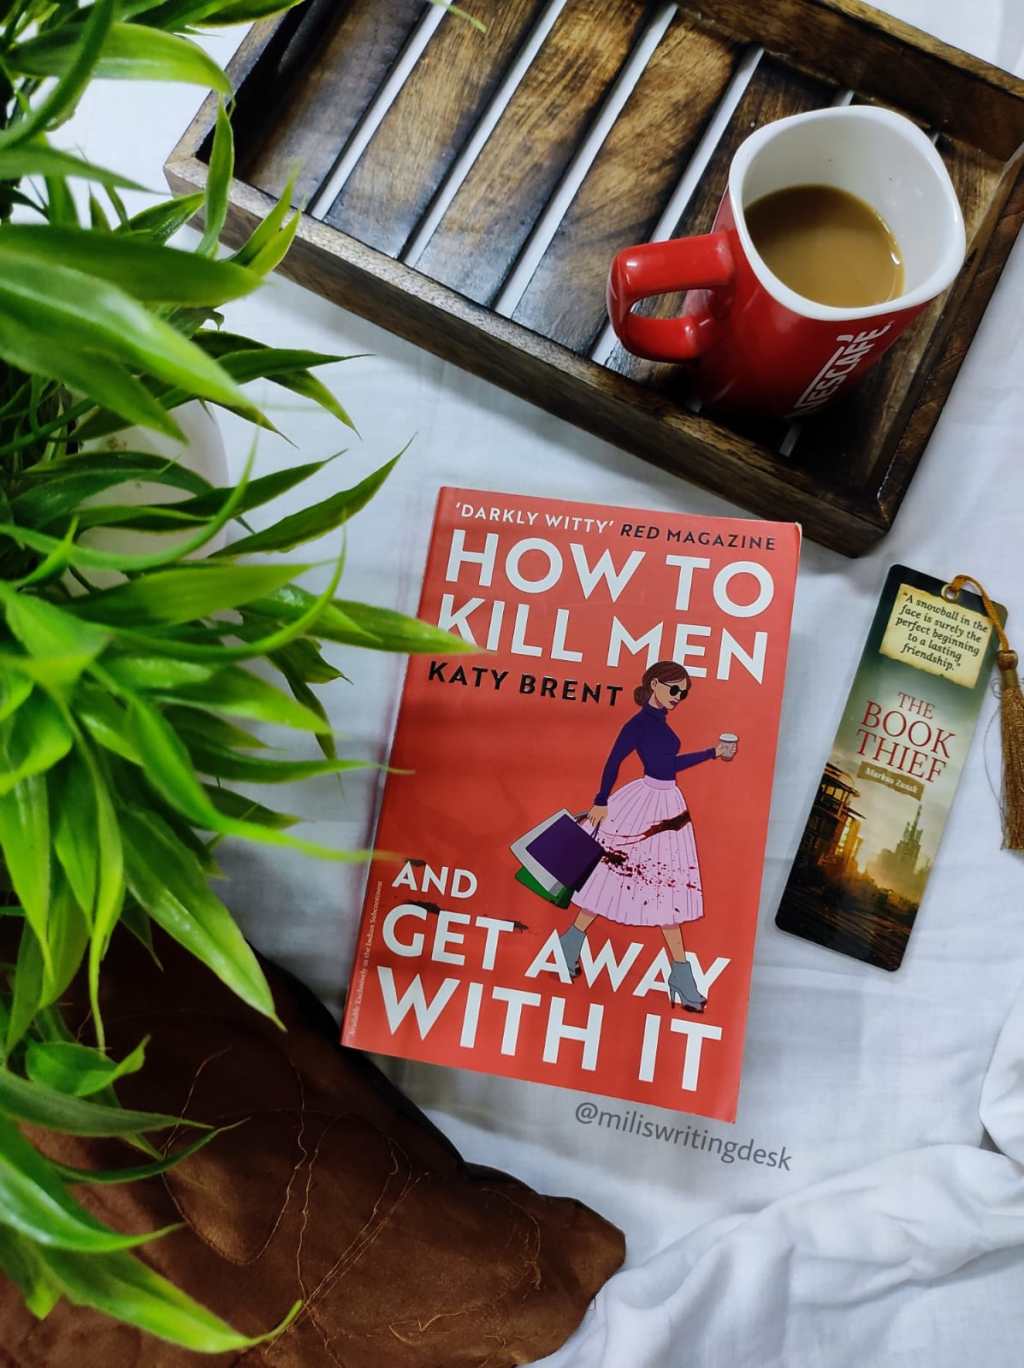 A finest dark comedy after ages- “How To Kill Men And Getaway With It” by Katy Brent – Book Review